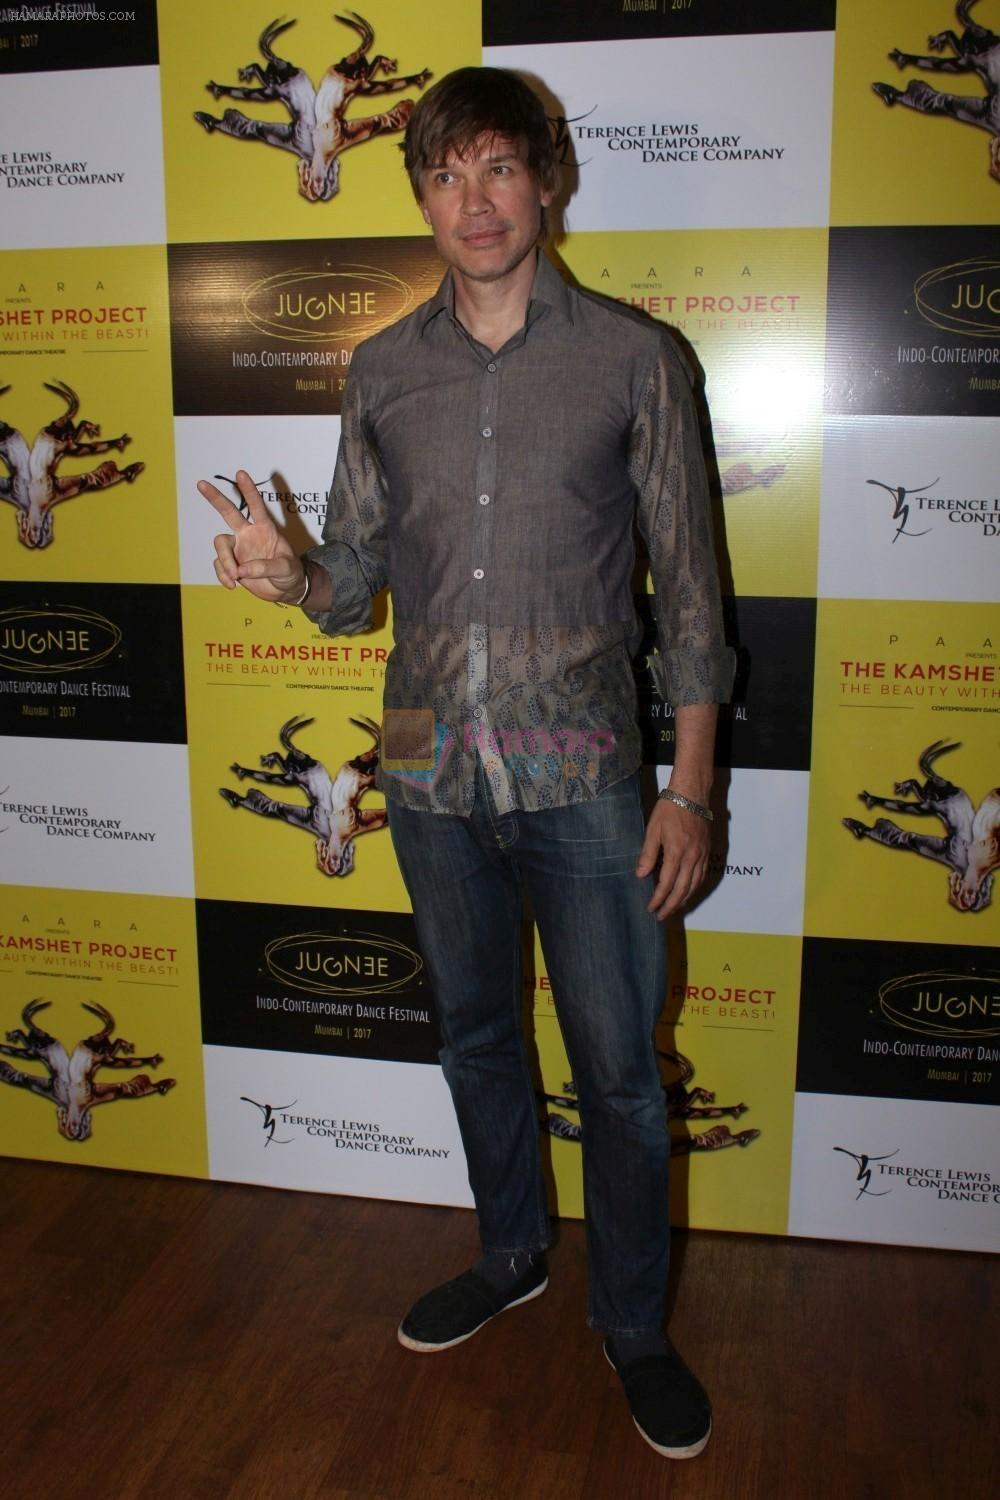 Luke Kenny at the Red Carpet Of Terence Lewis Production The Kamshet Project on 29th April 2017